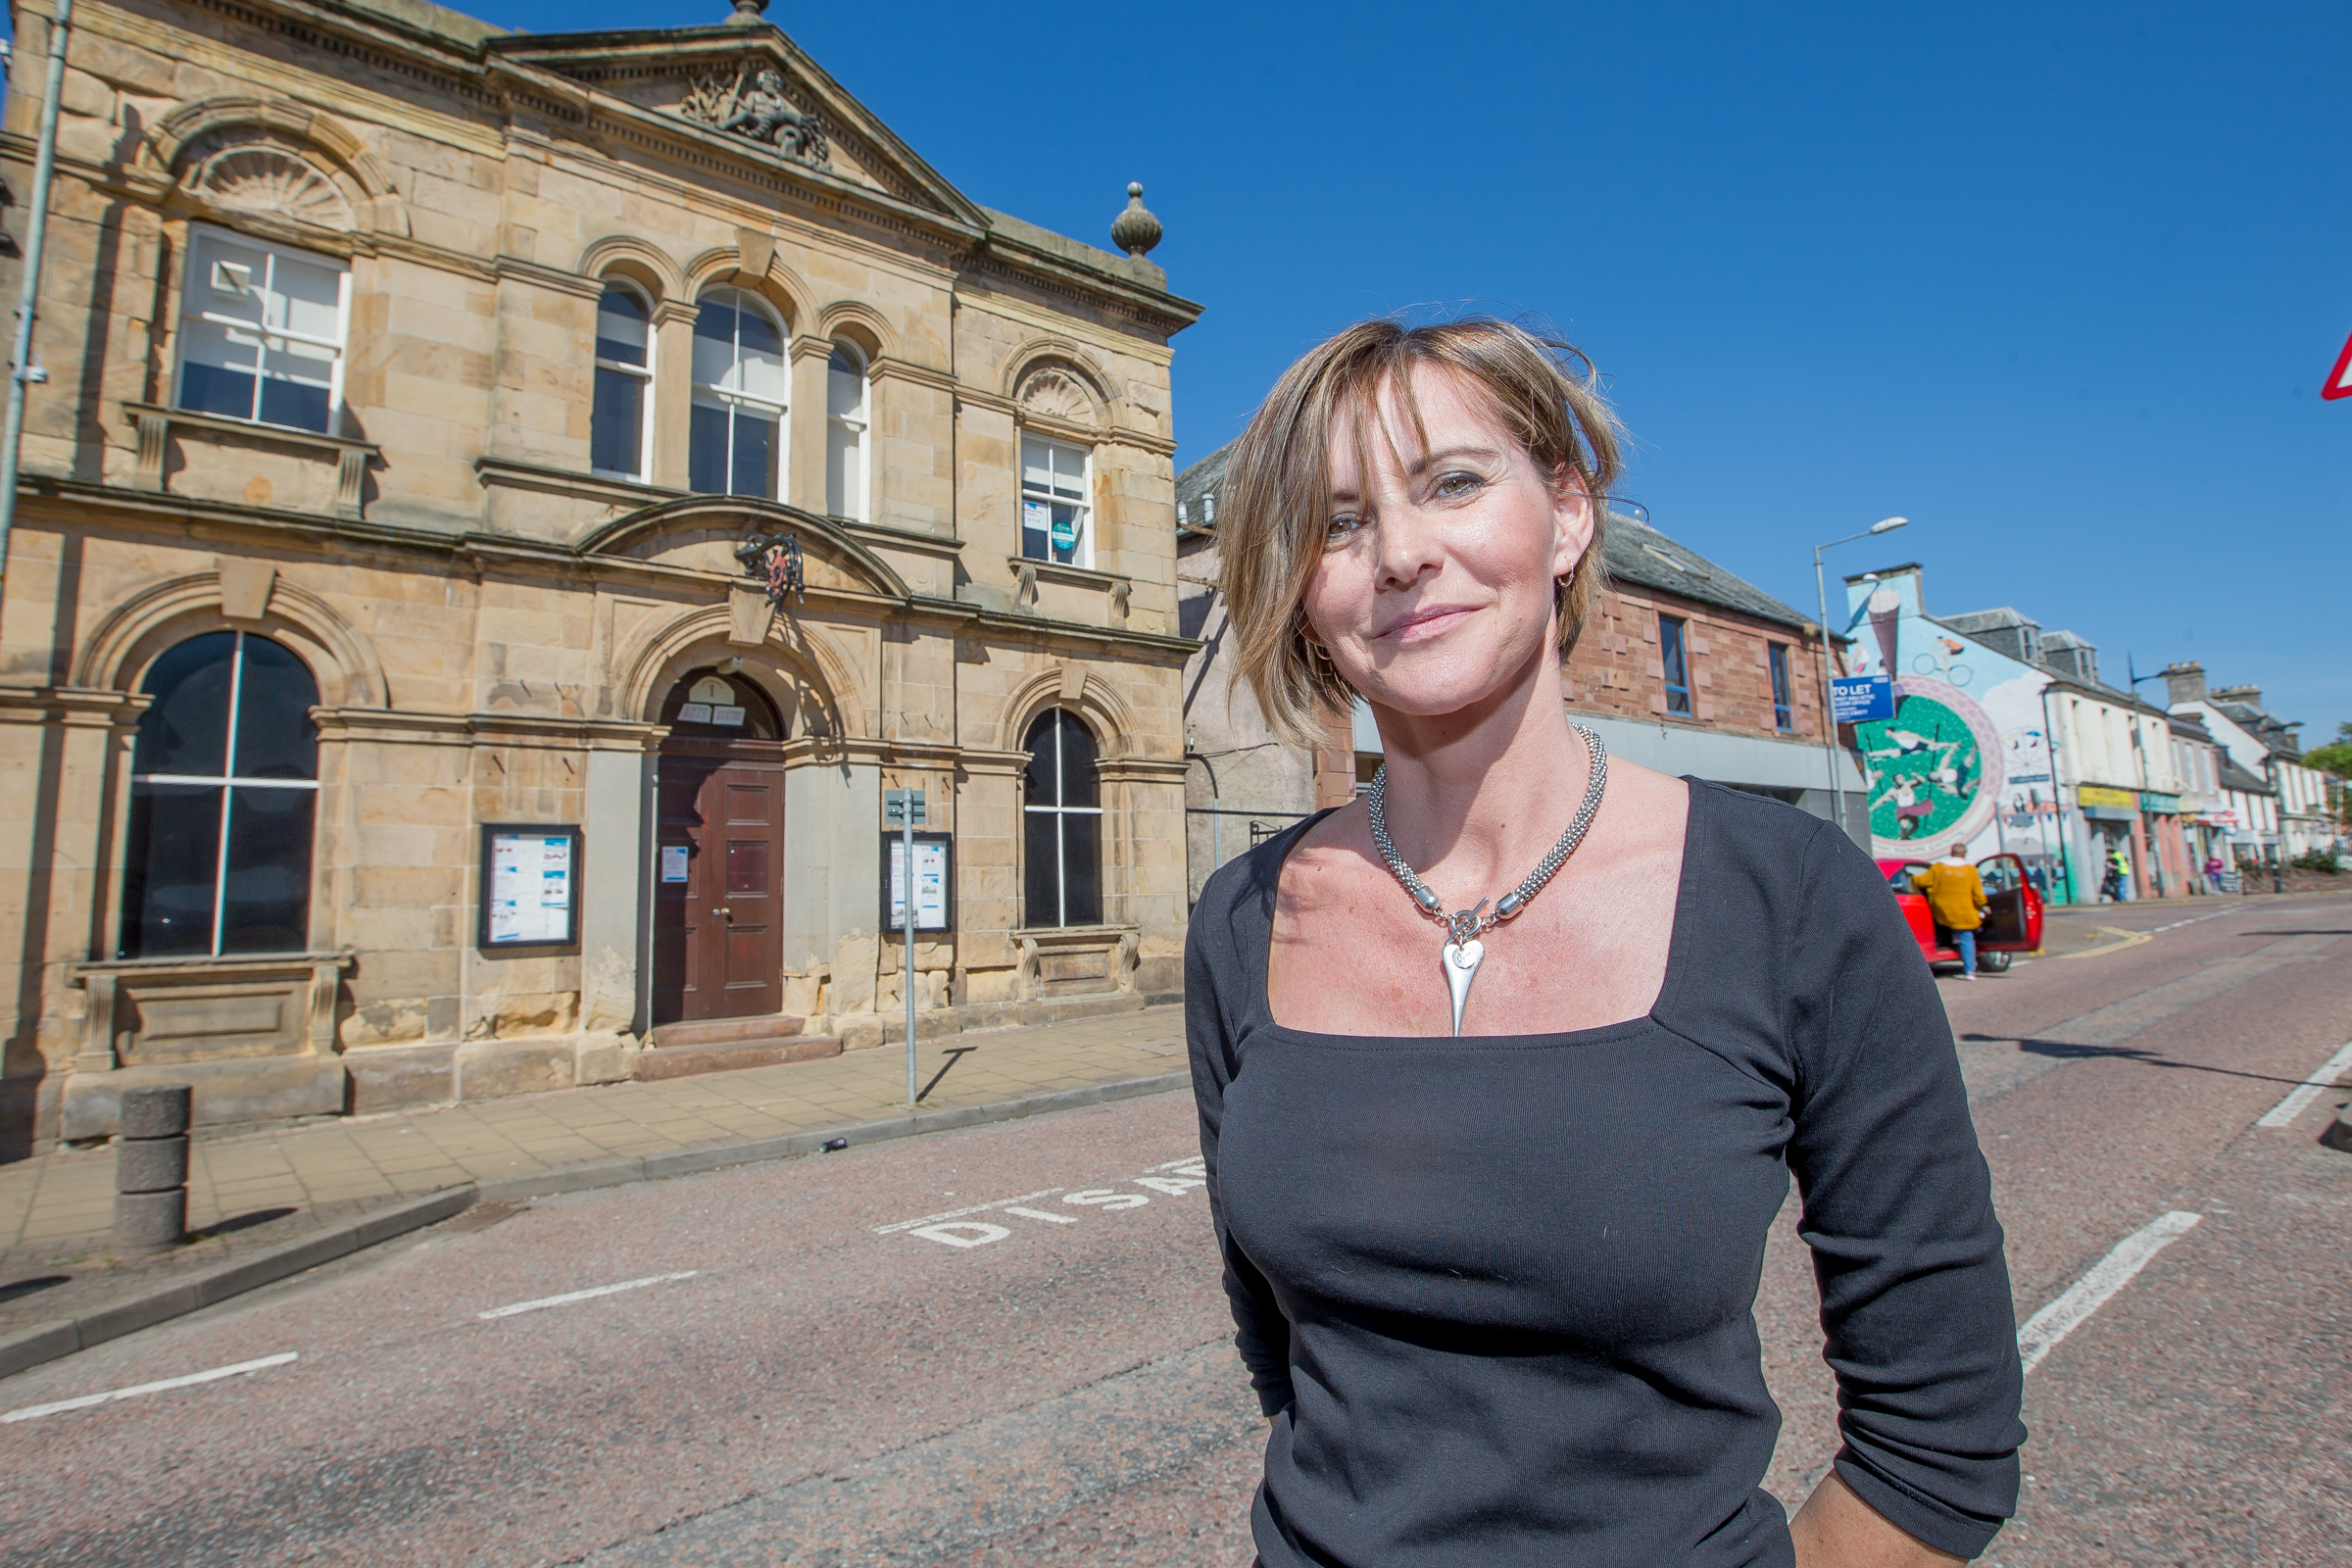 Marie Clarke is heading up a community group, Invergordon Development Trust to try and raise the money to buy the Town Hall which the council wants to dispose of.